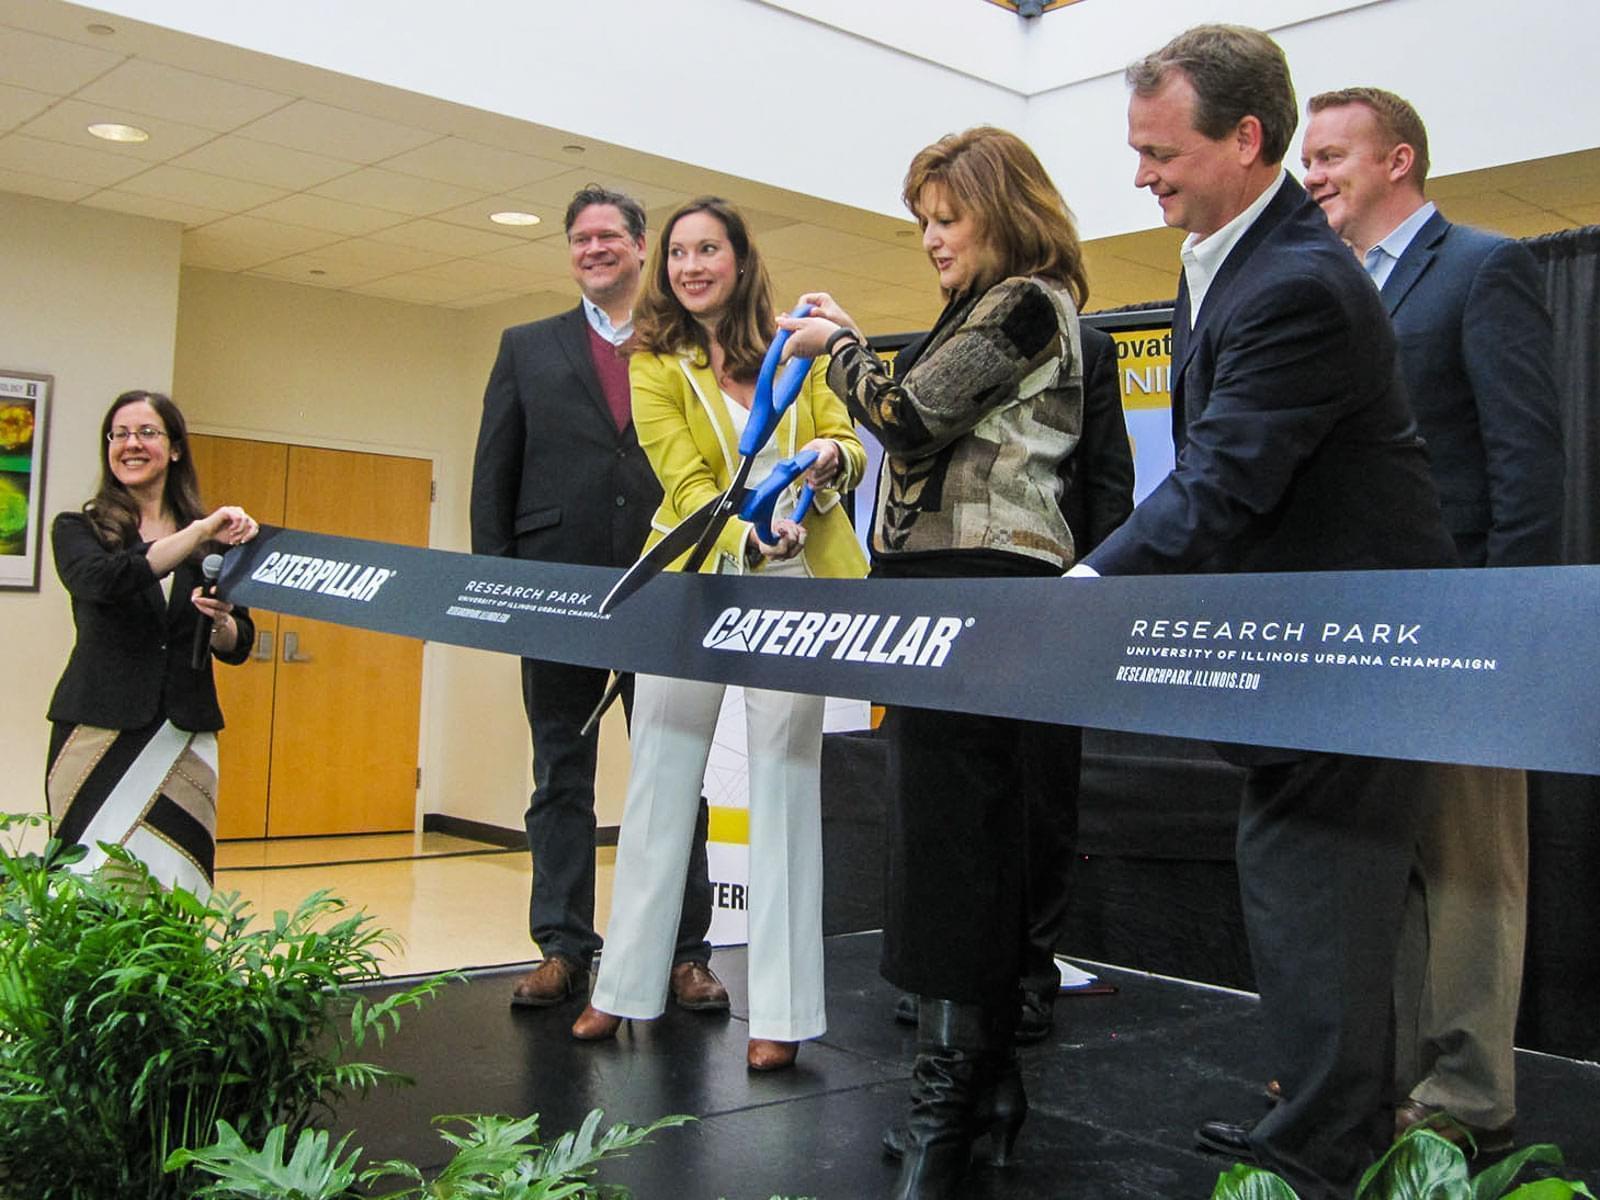 Caterpillar, University of Illinois and Champaign officials cut a ceremonial ribbon to open the Caterpillar Data Innovation Lab.